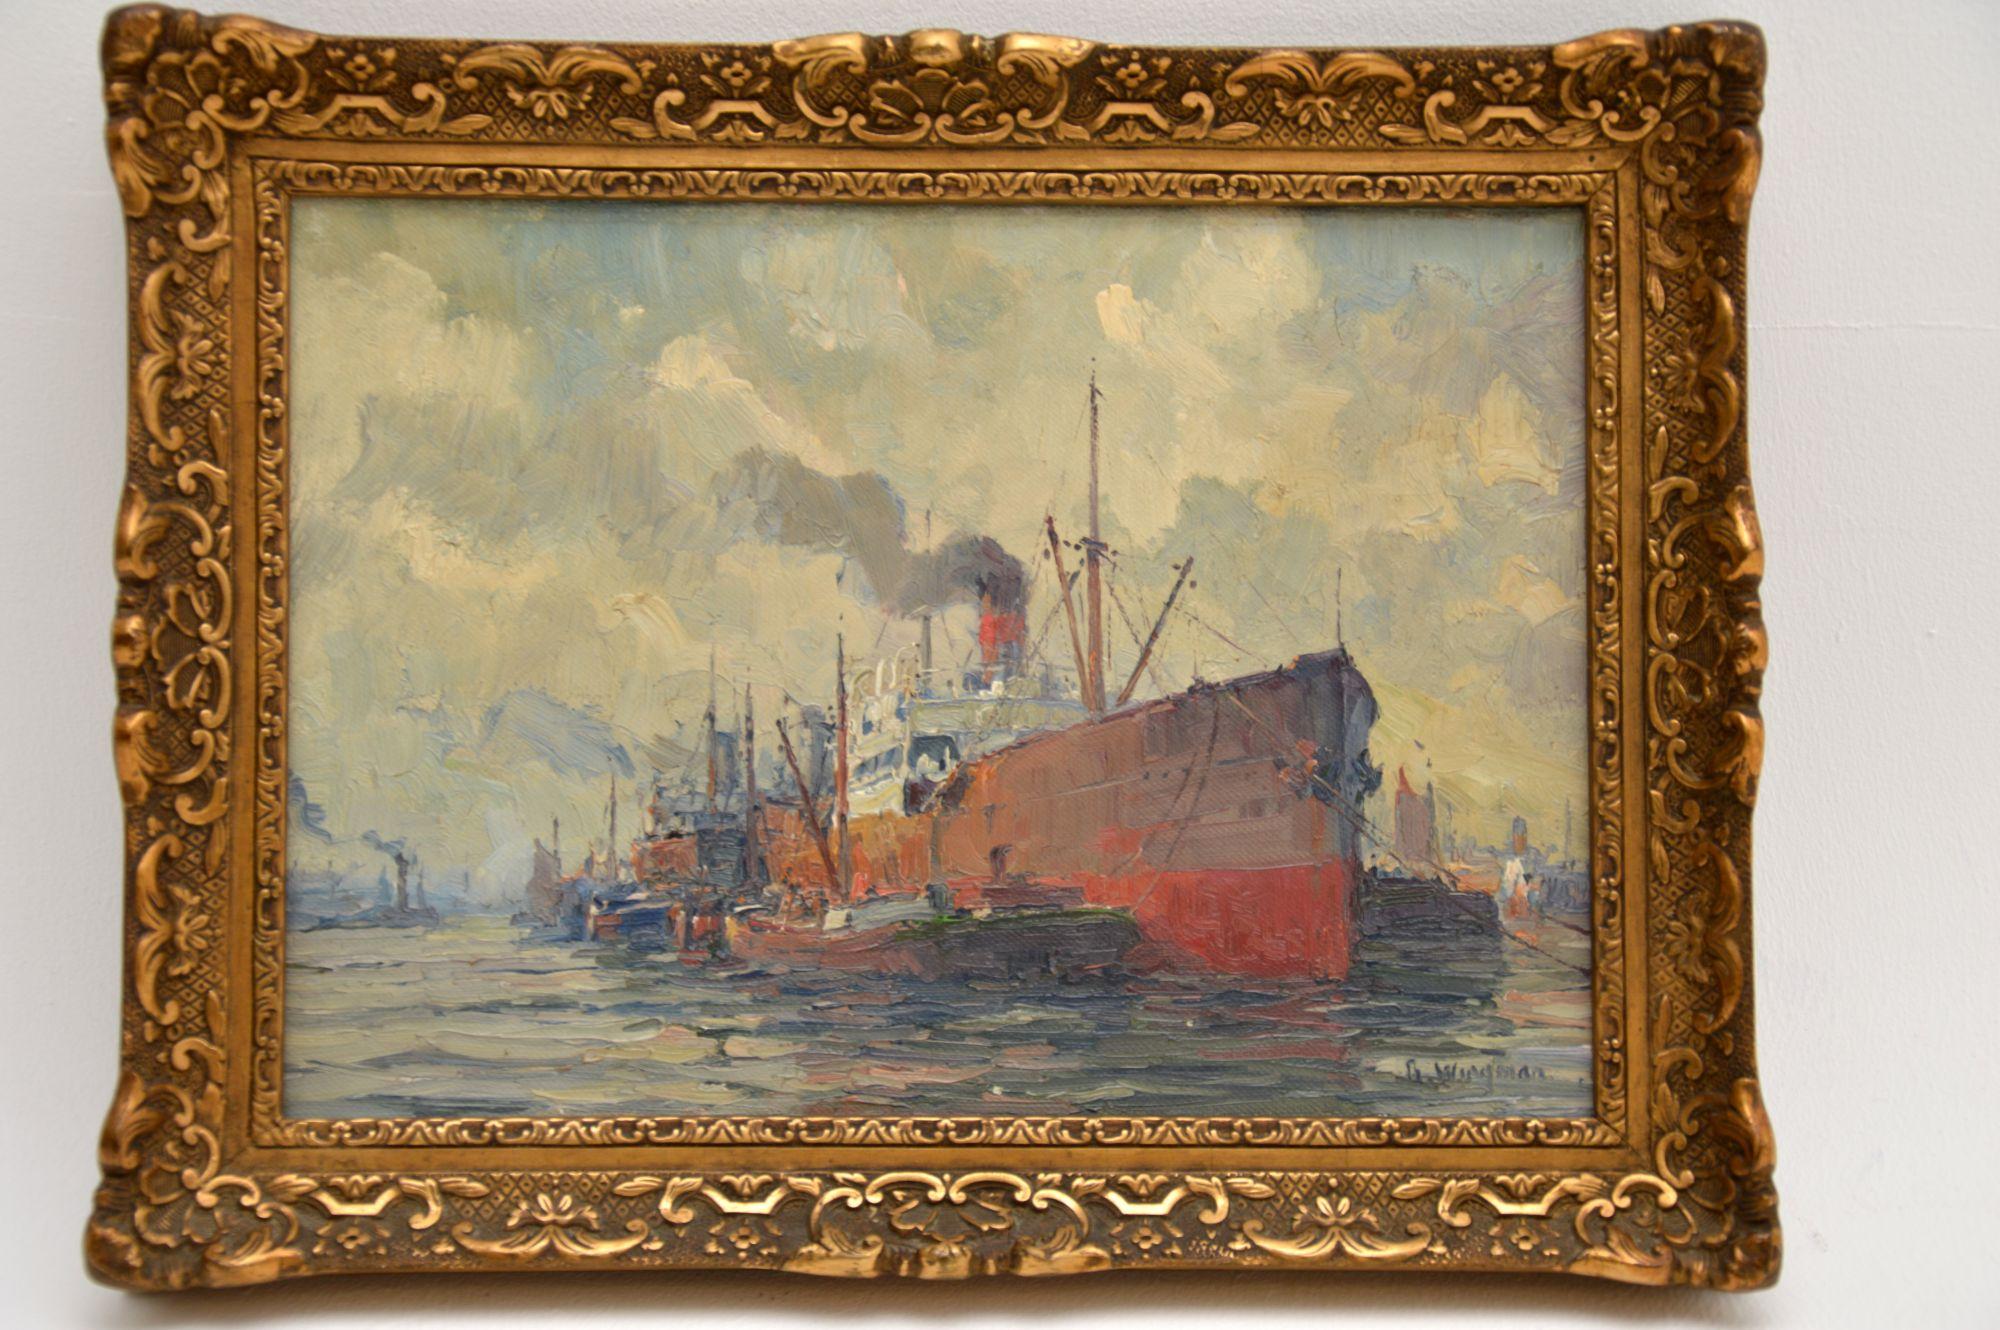 A beautiful antique oil painting on canvass by Gerard Wiegman (1875-1964). This is Dutch in origin, it was painted in the early twentieth century around the 1920-30’s.

It depicts an oil tanker in harbour, flanked by smaller boats. It is beautifully